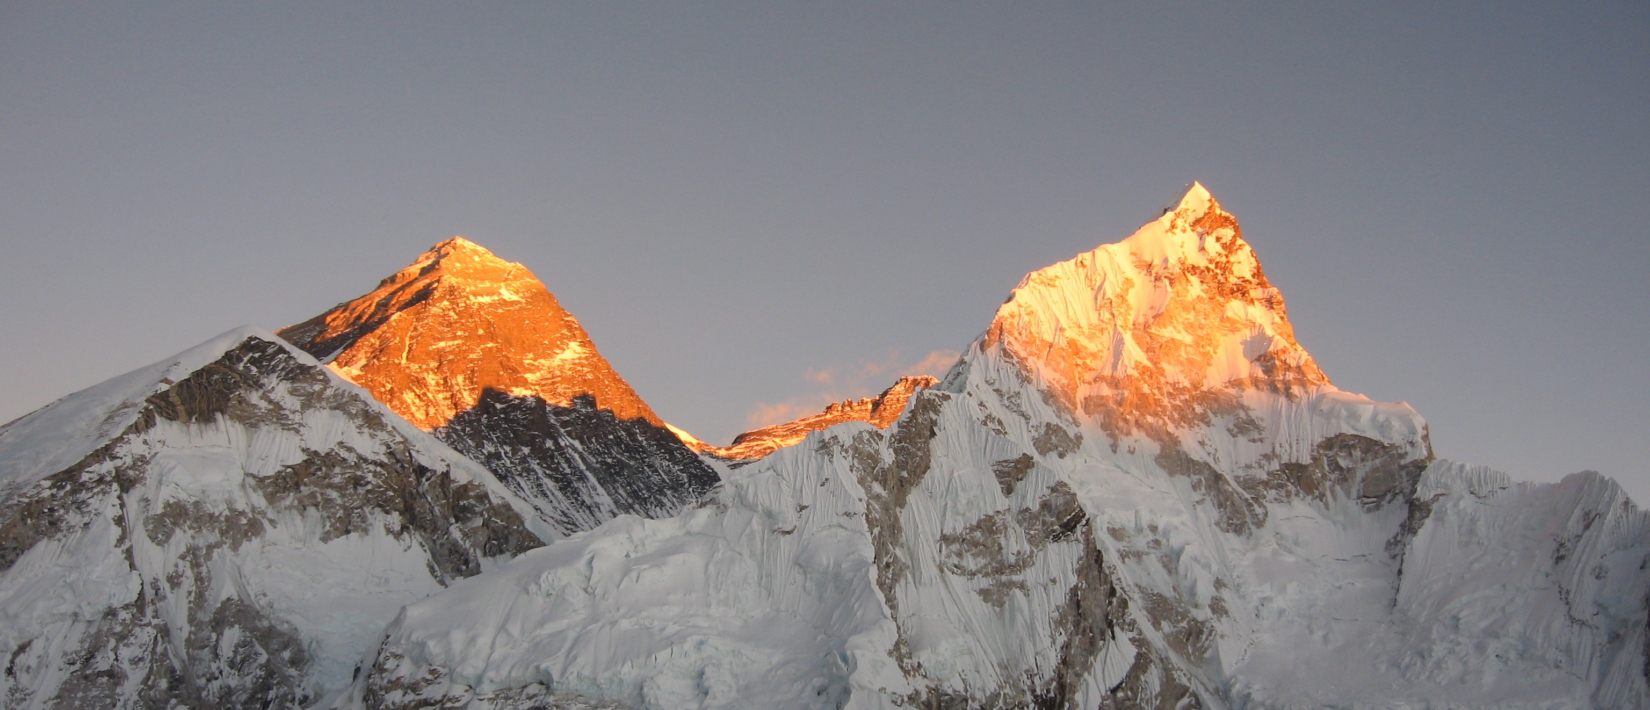 A photograph of sunrise at Mt. Everest, taken from the Kala Patthar viewpoint near Everest Base Camp in Nepal